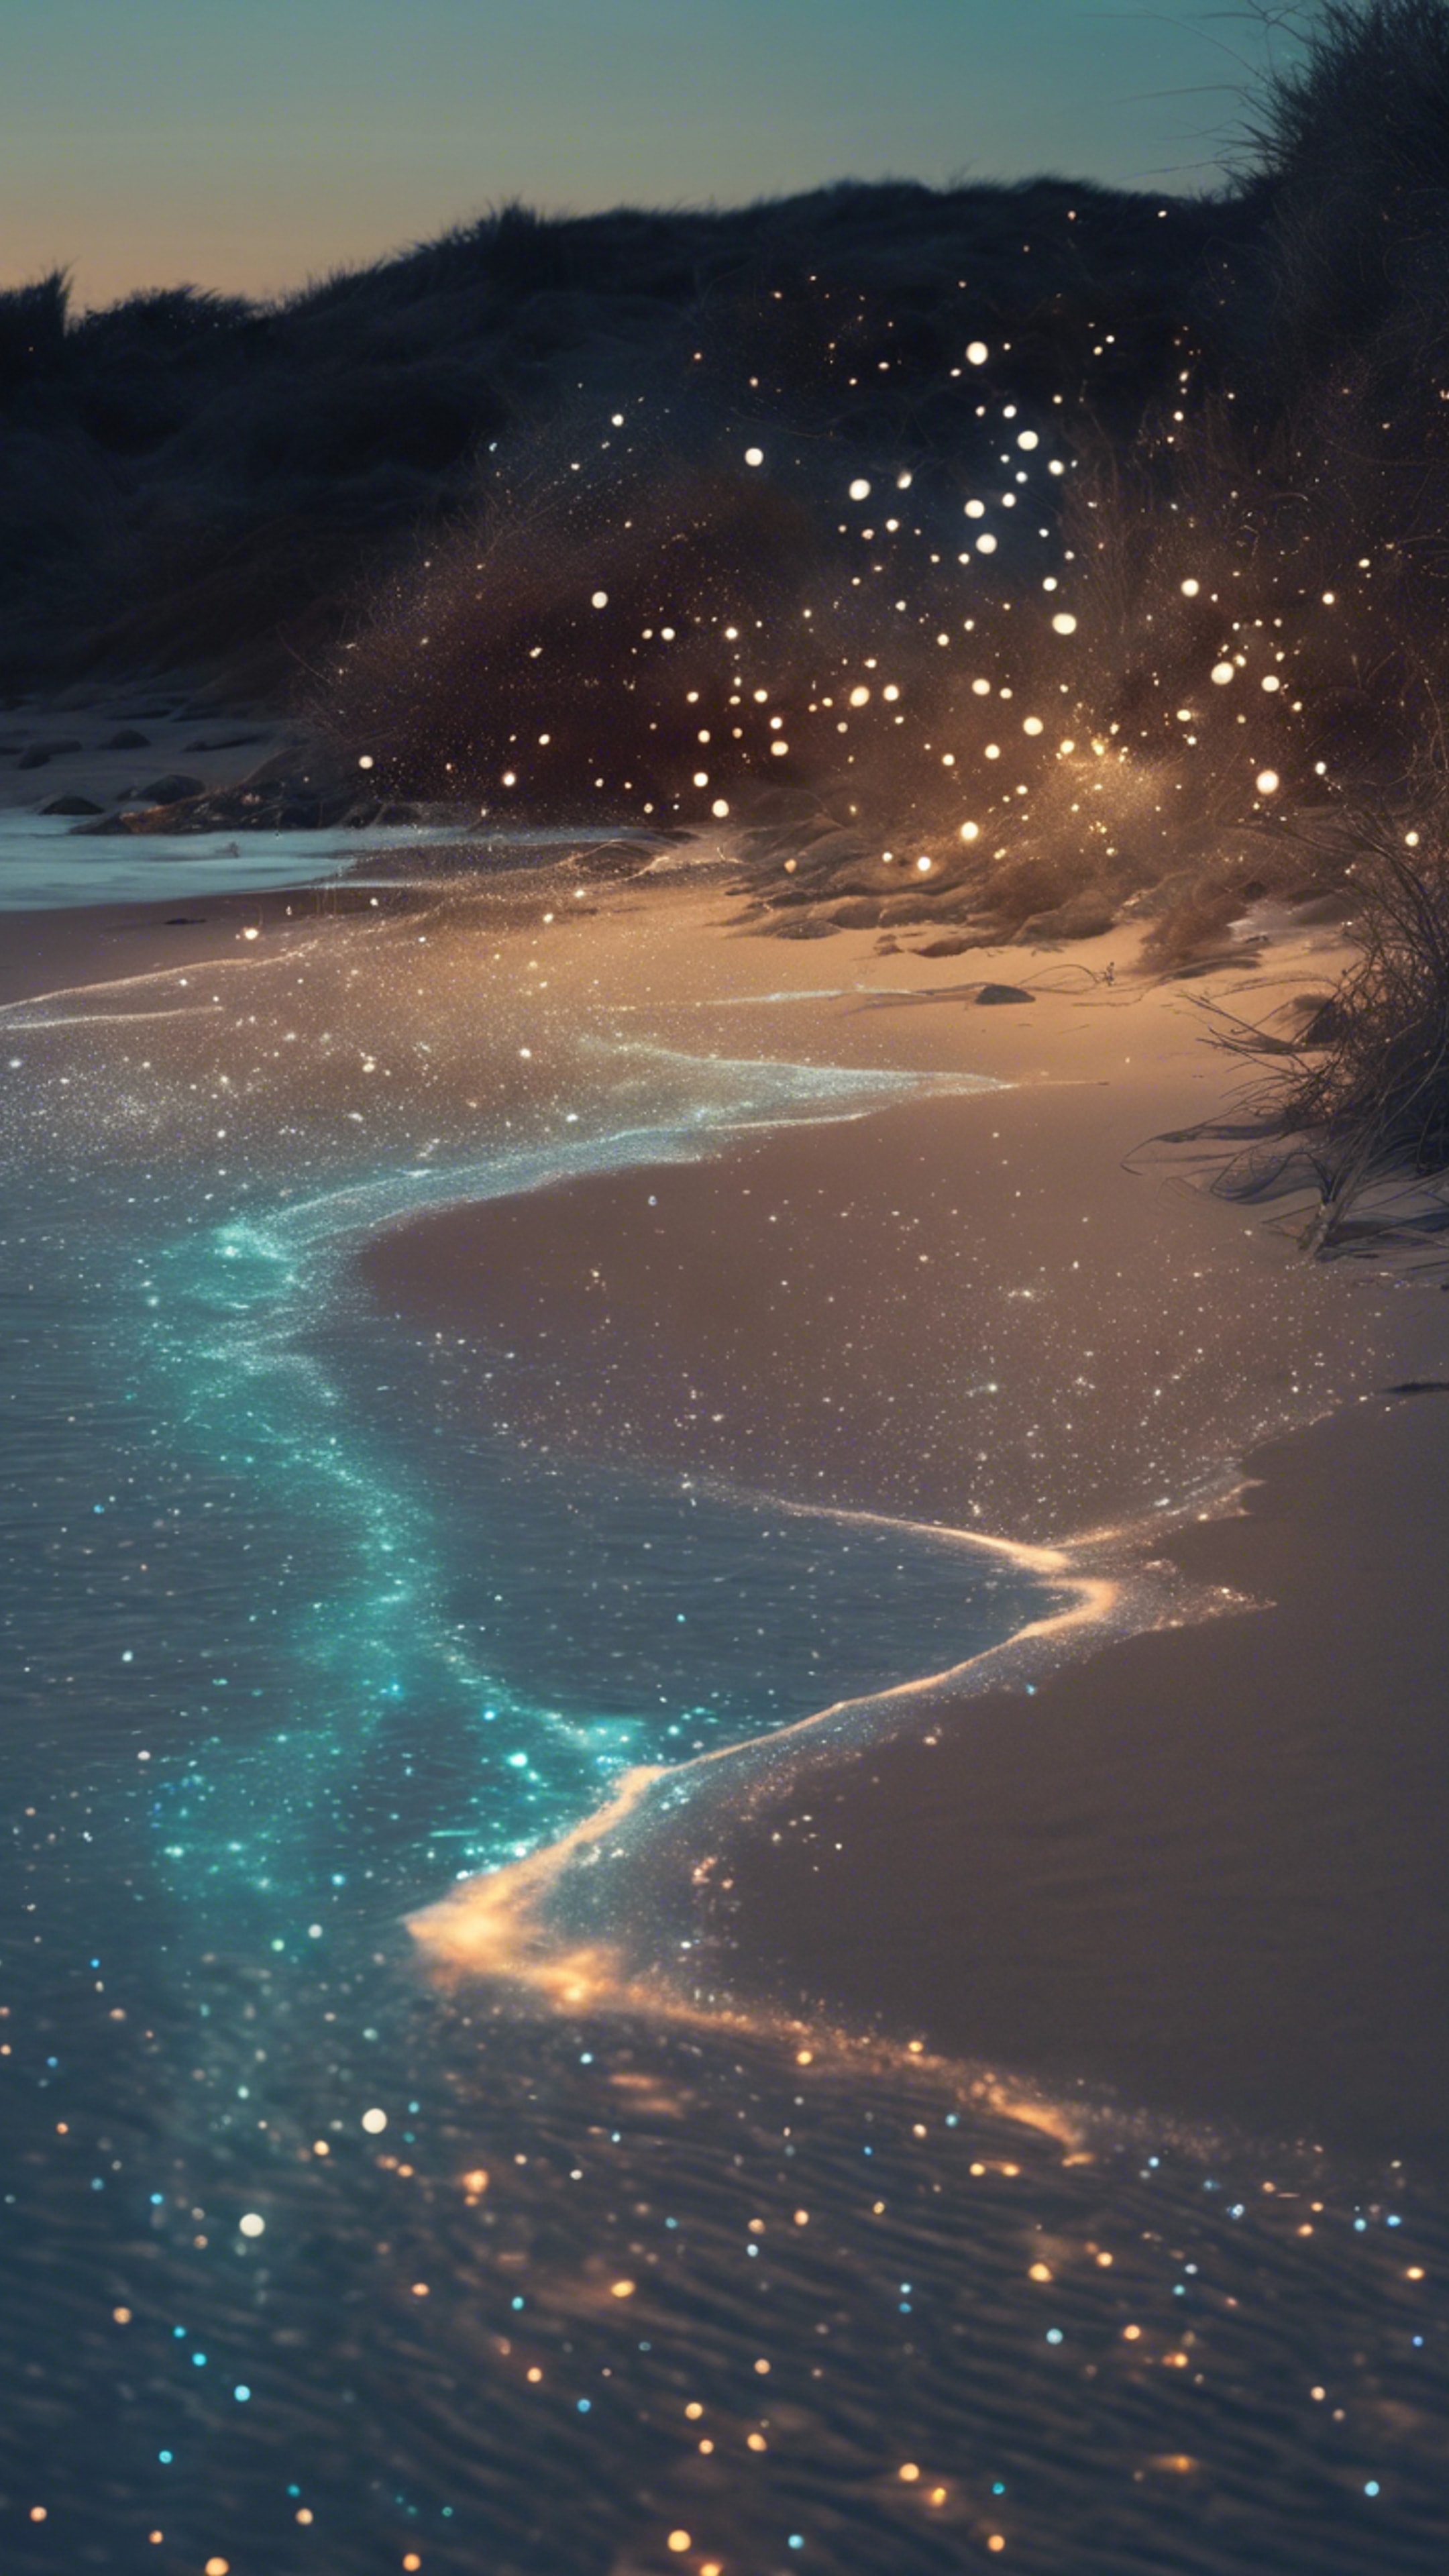 A starry night at the beach with glowing bioluminescent plankton washing up on the shore. 牆紙[d401d0f727fe411fb1be]